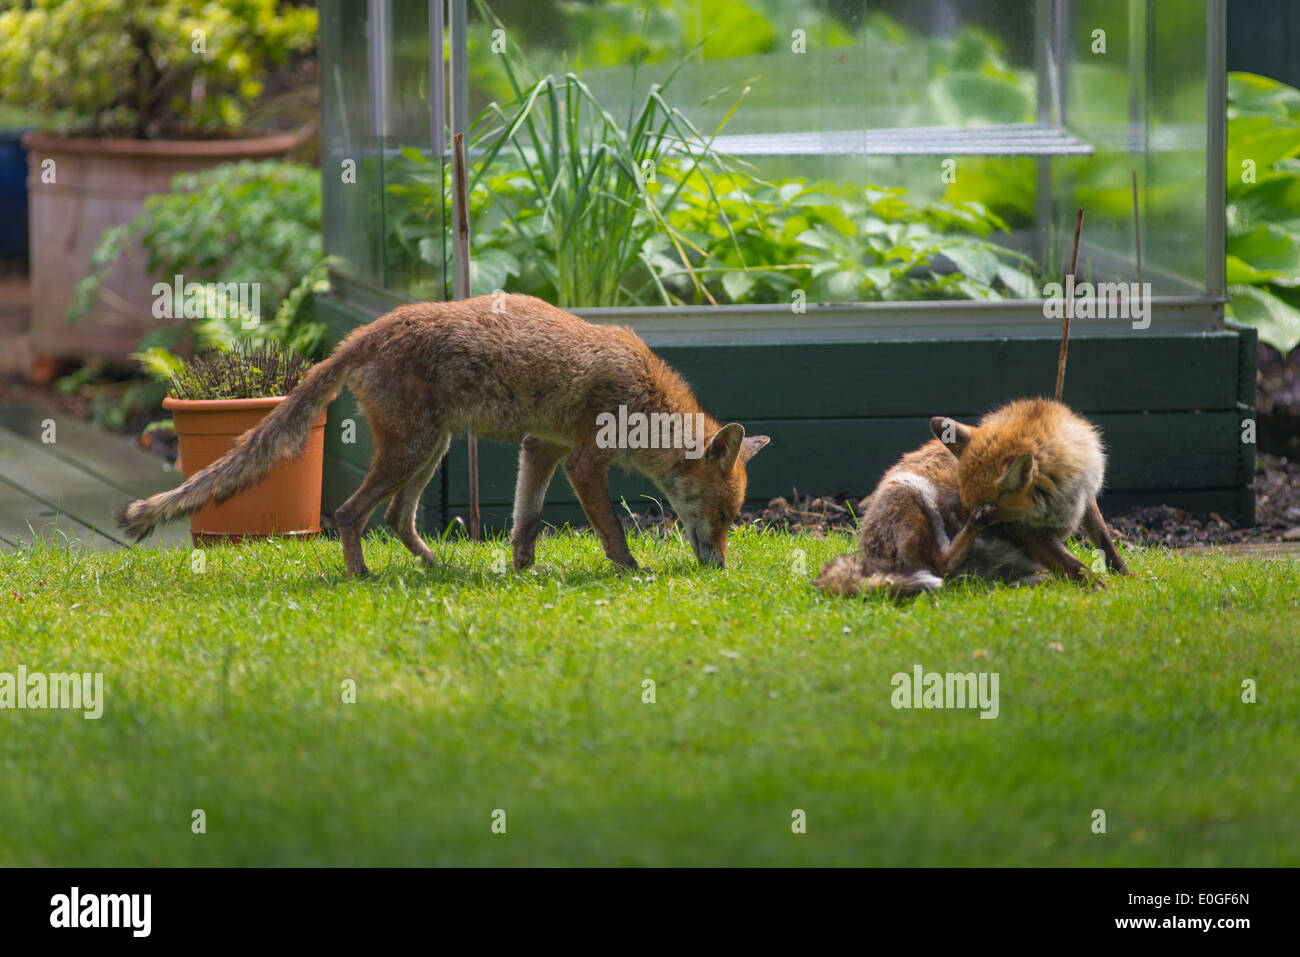 Two Red Foxes, Vulpes vulpes, on garden lawn with vegetable frame in the background Stock Photo